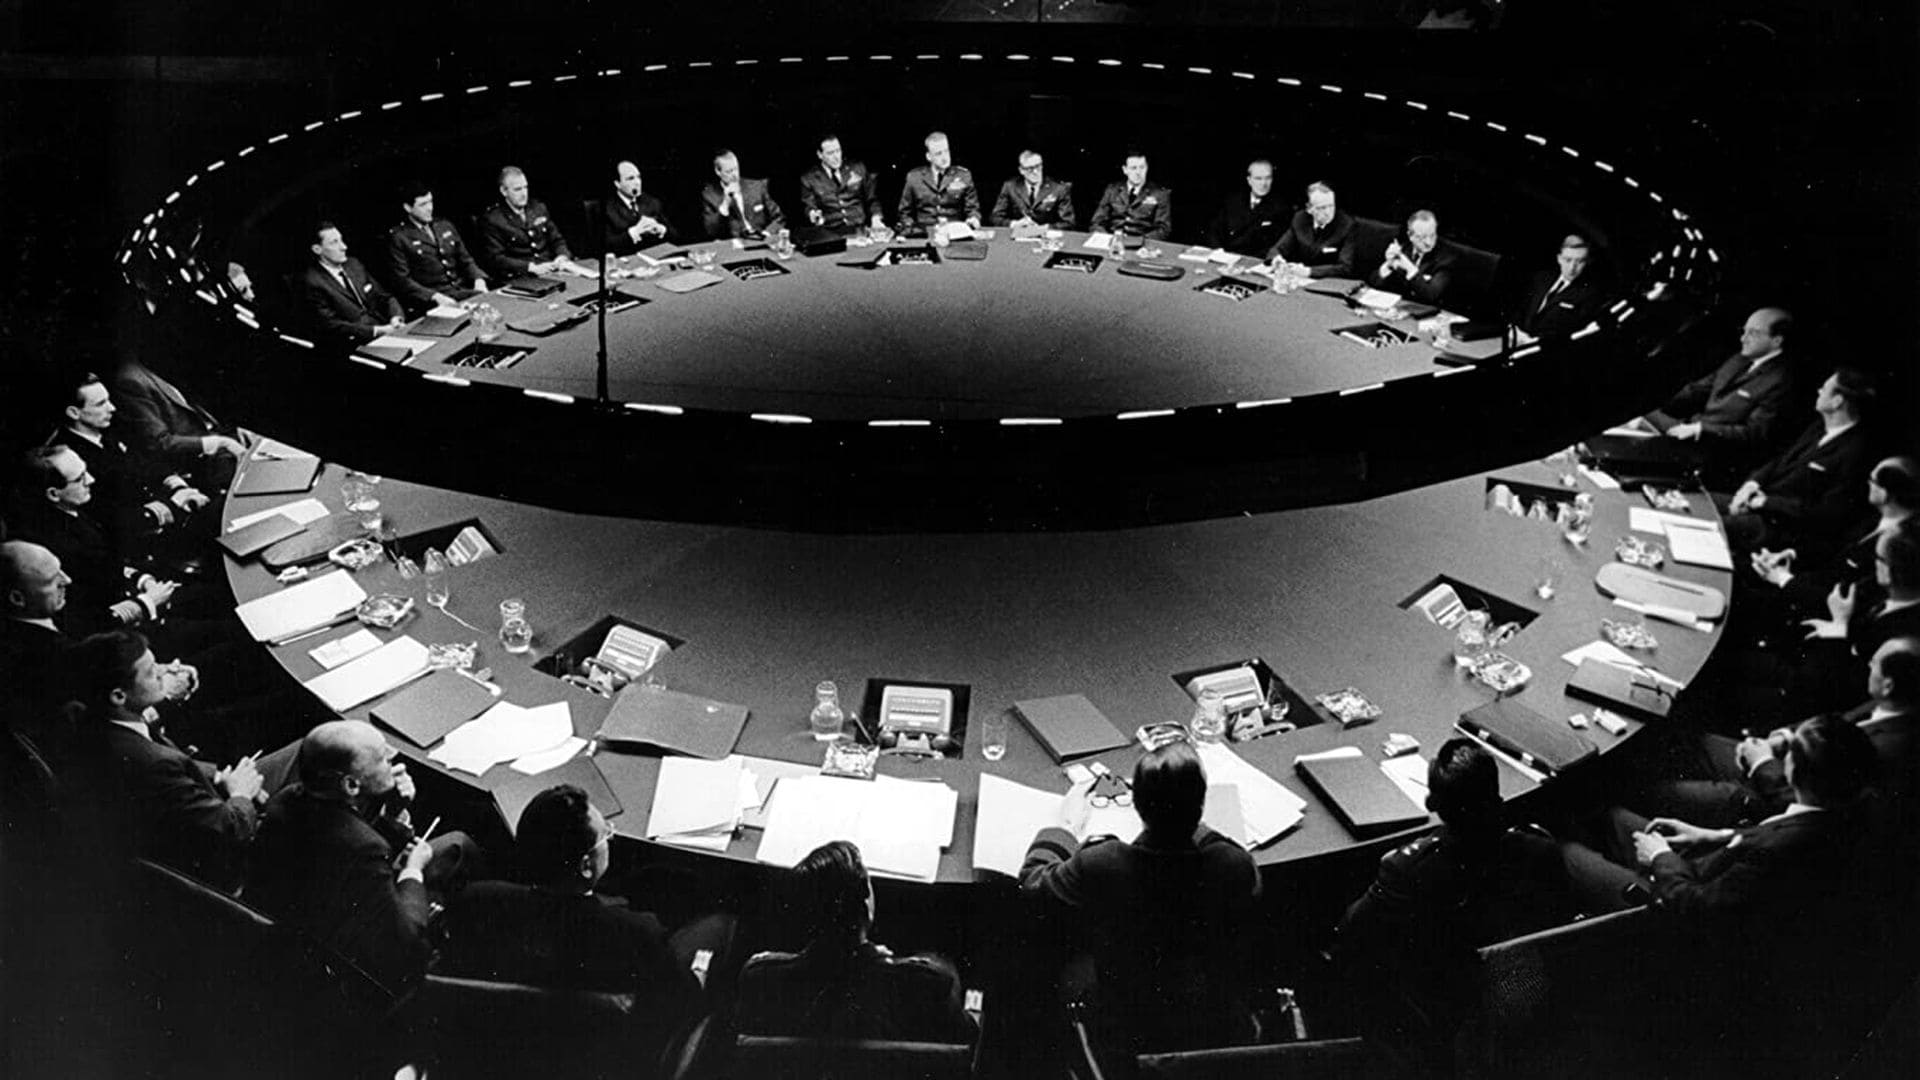 Dr. Strangelove or: How I Learned to Stop Worrying and Love the Bomb 1964 123movies